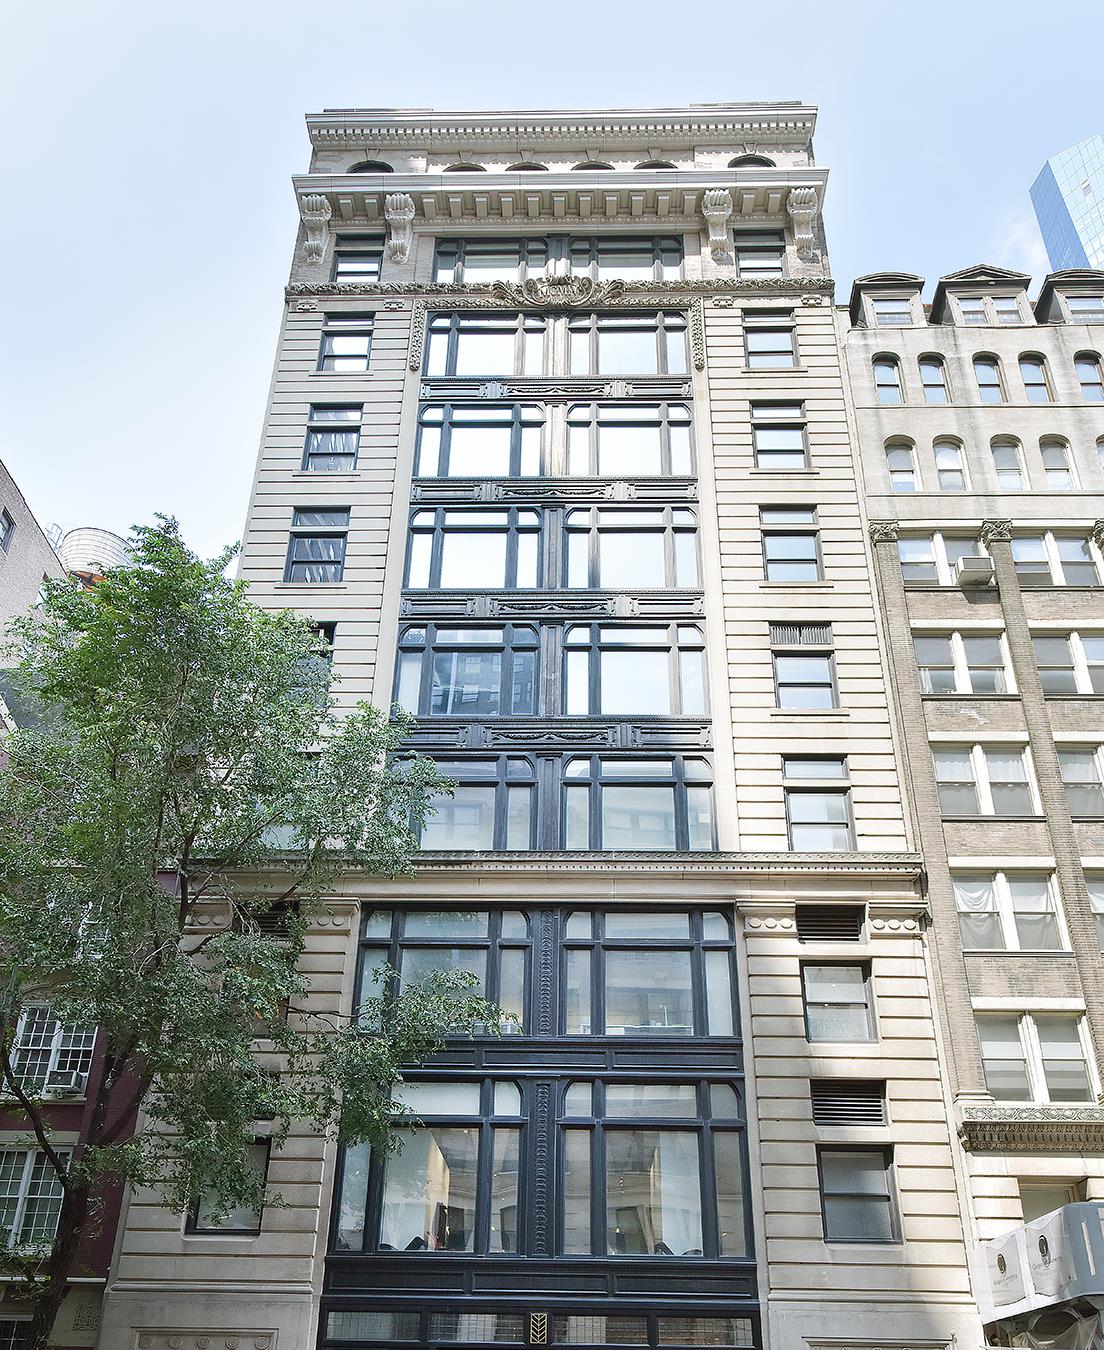 25 East 21st Street Loft-3, Flatiron District, Downtown, NYC - 4 Bedrooms  
4.5 Bathrooms  
8 Rooms - 